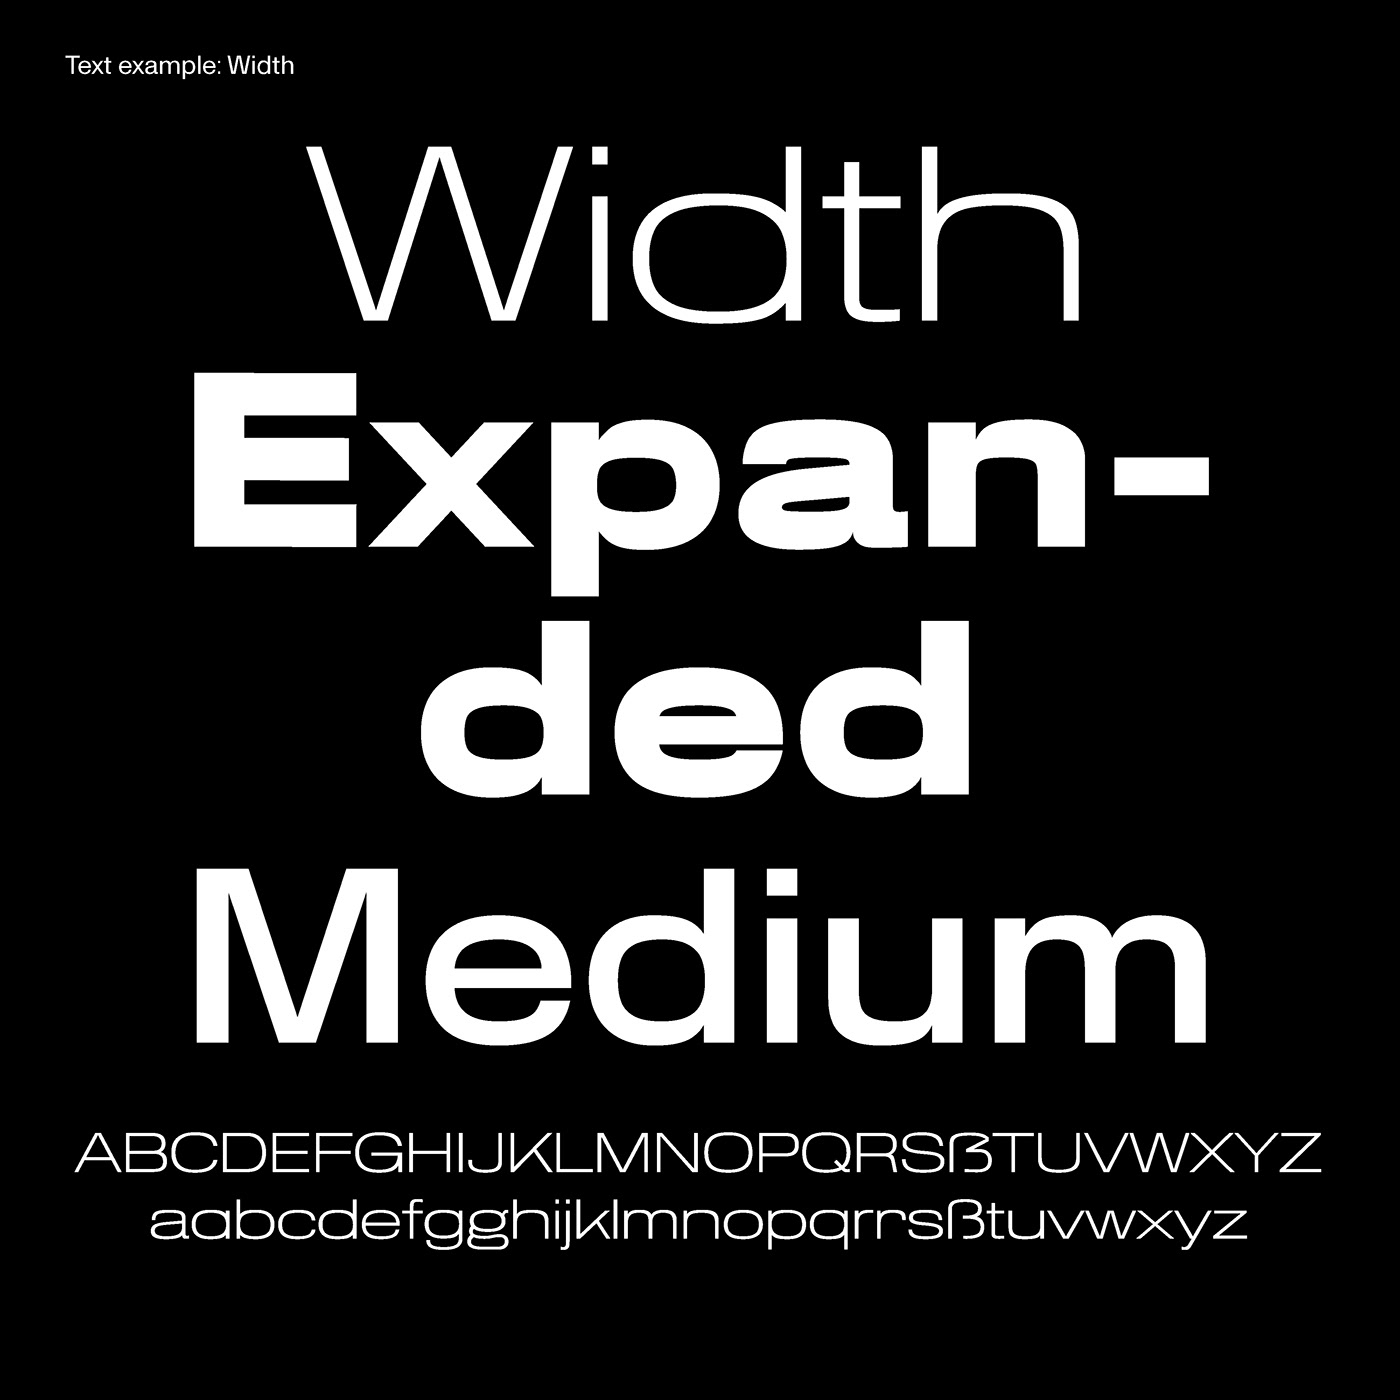 Bagage: Width example